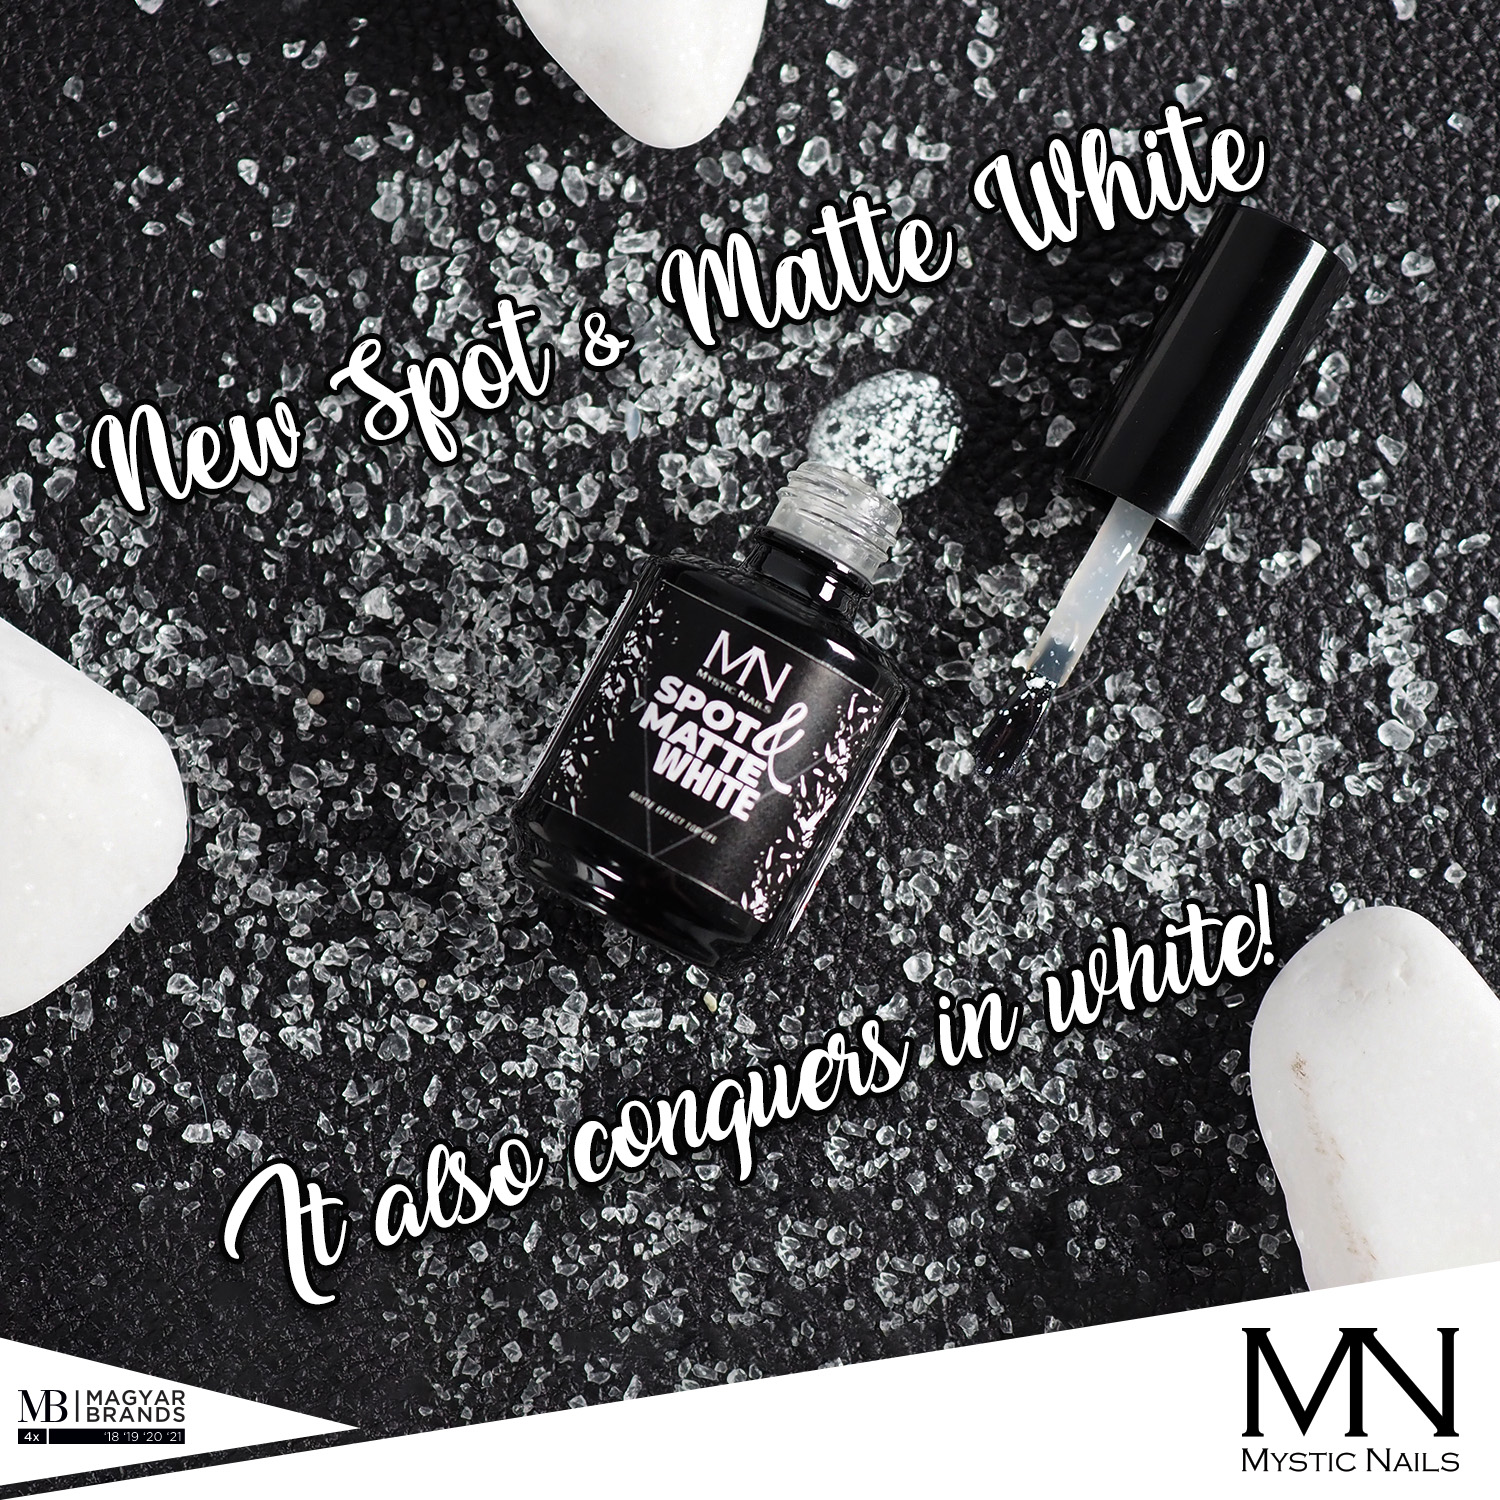 Spot_and_Matte_White_It_also_conquers_in_white__Banner_EN (1)